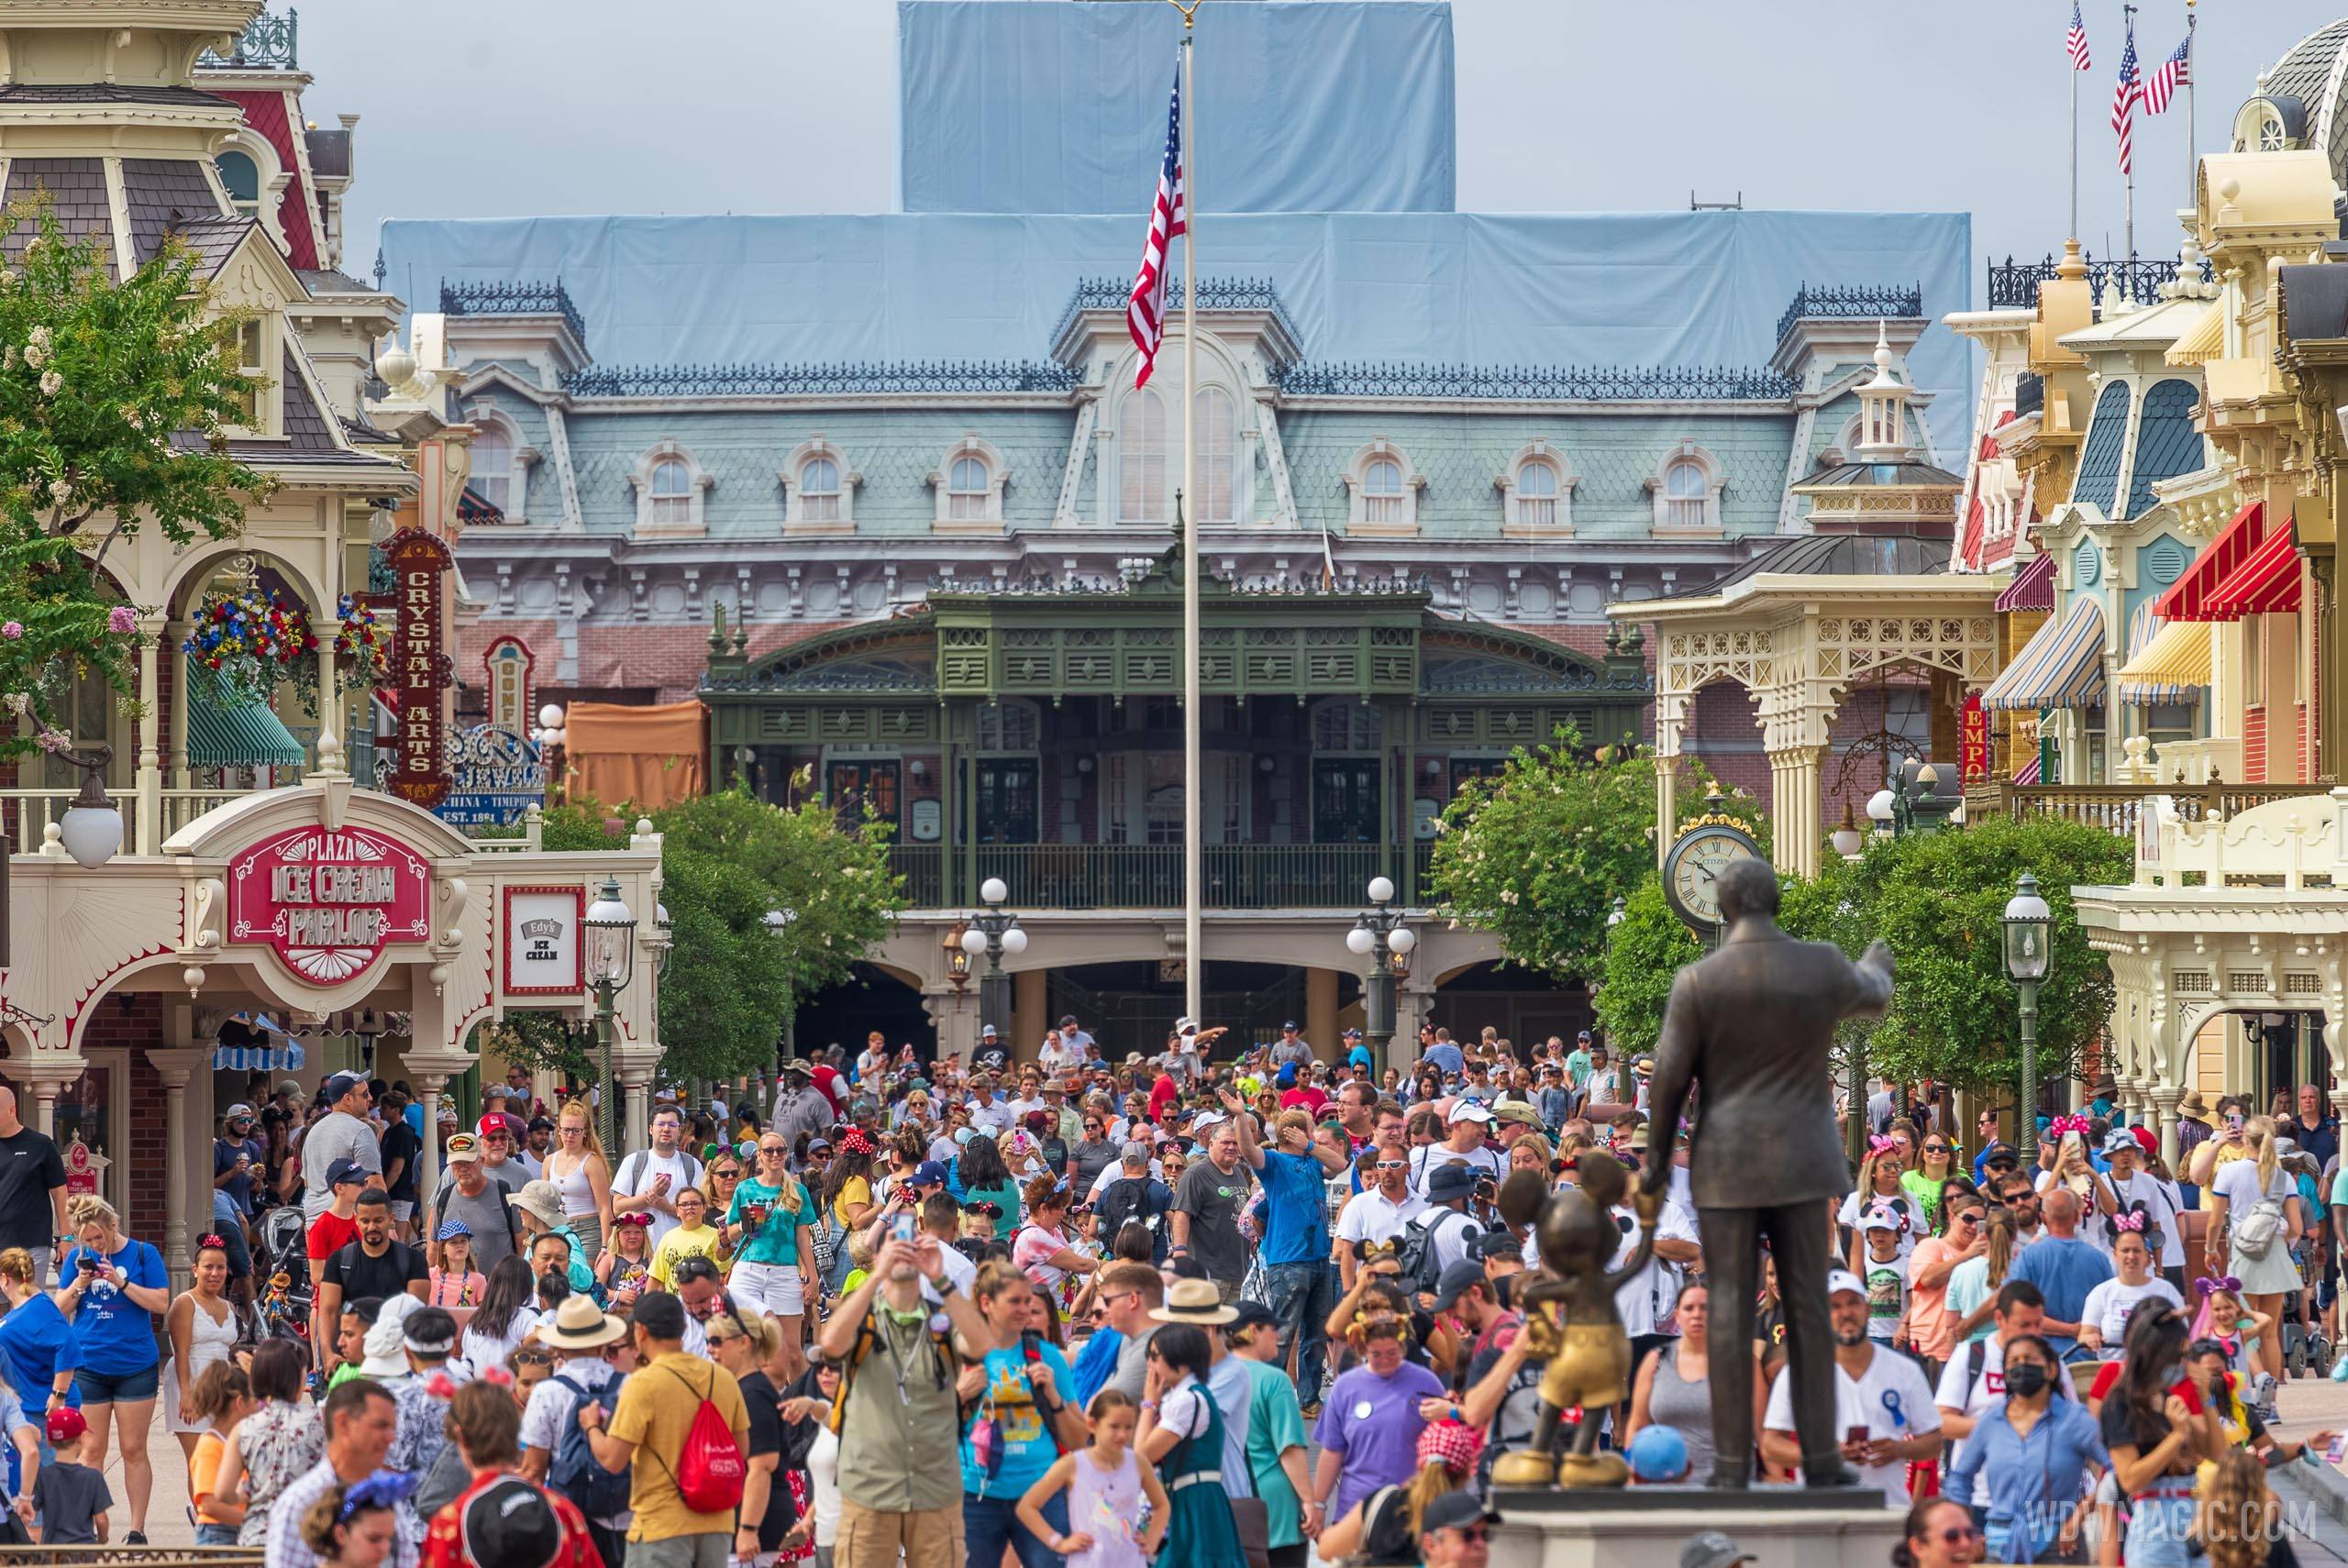 Guests are returning to Disney World in large numbers as restrictions are lifted